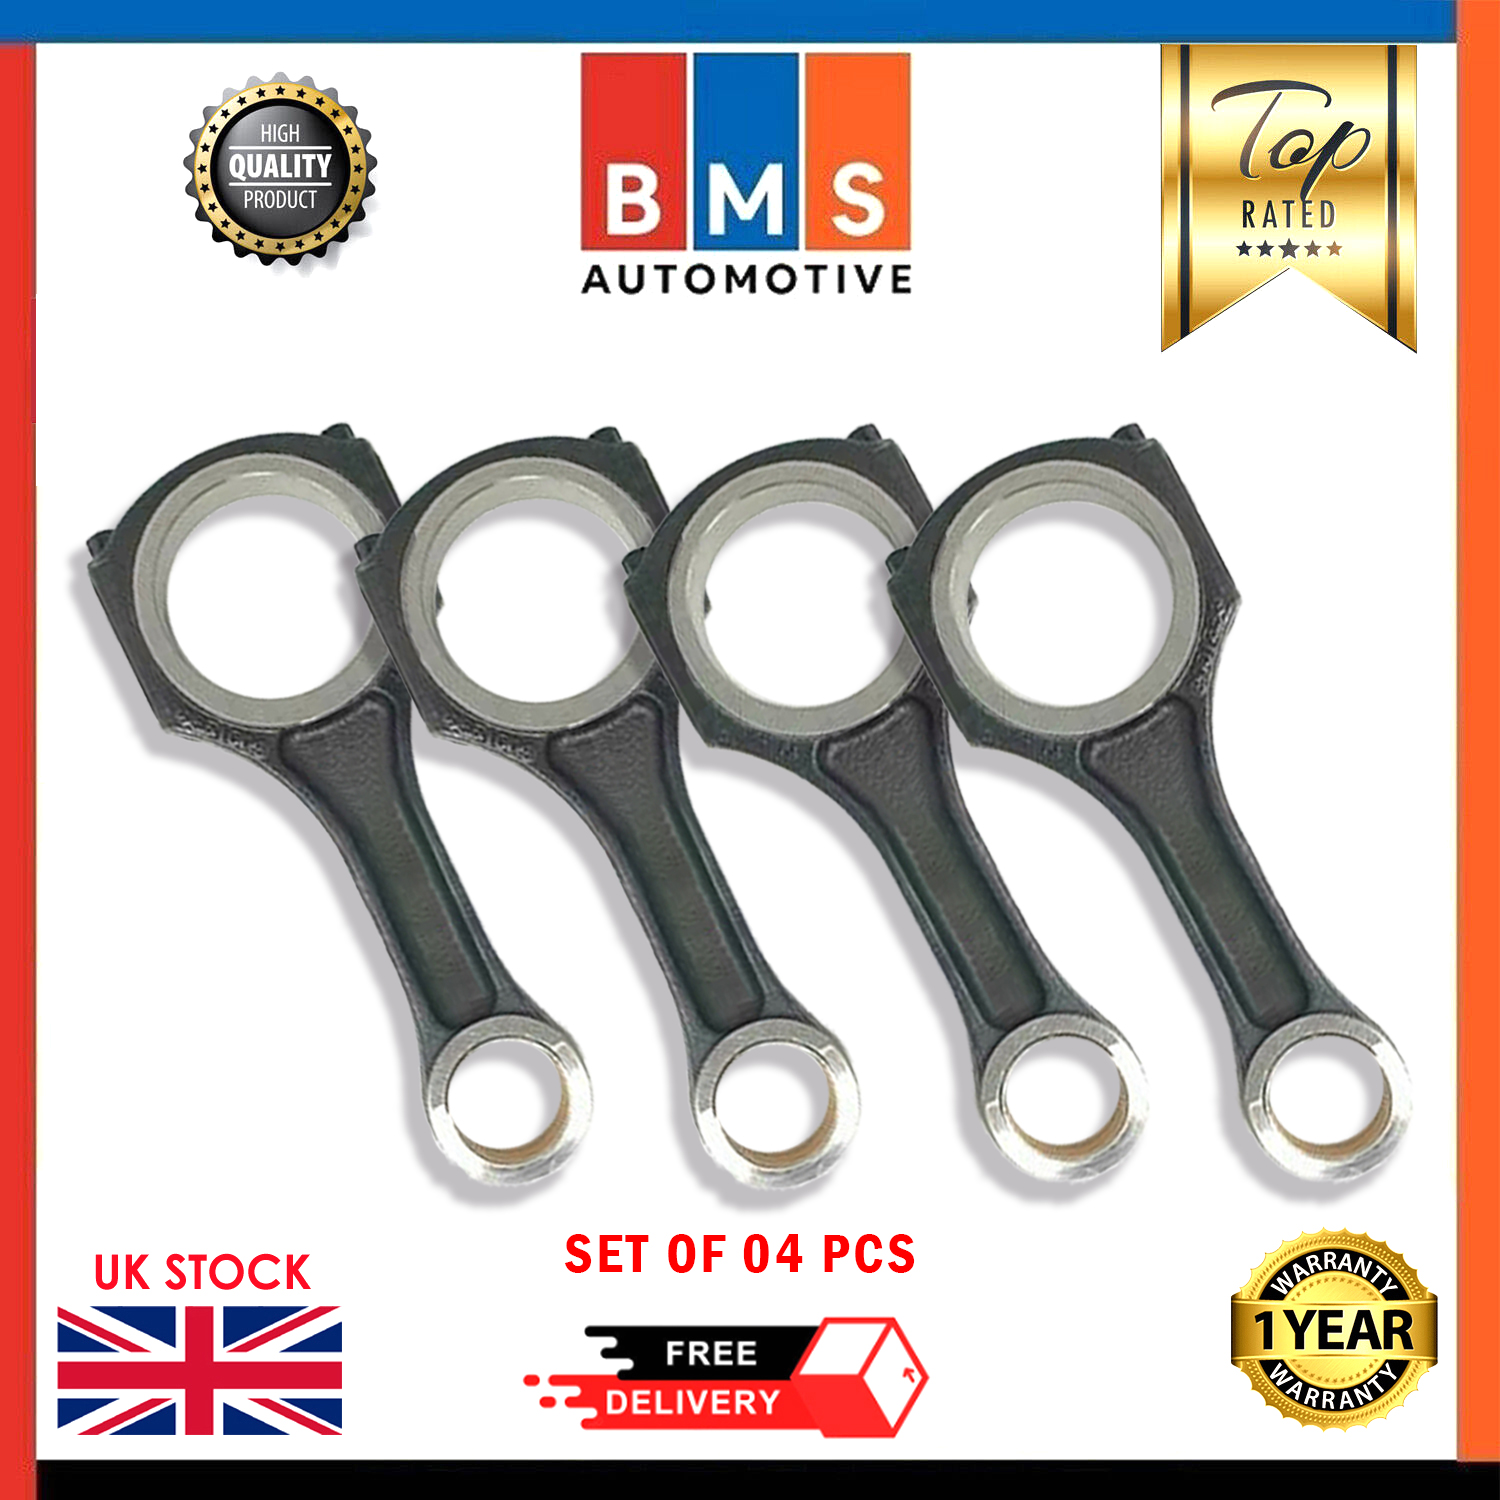 MERCEDES-BENZ A B C & E CLASS OM 651 2.2 DIESEL CONNECTING ROD CON ROD SET OF 04